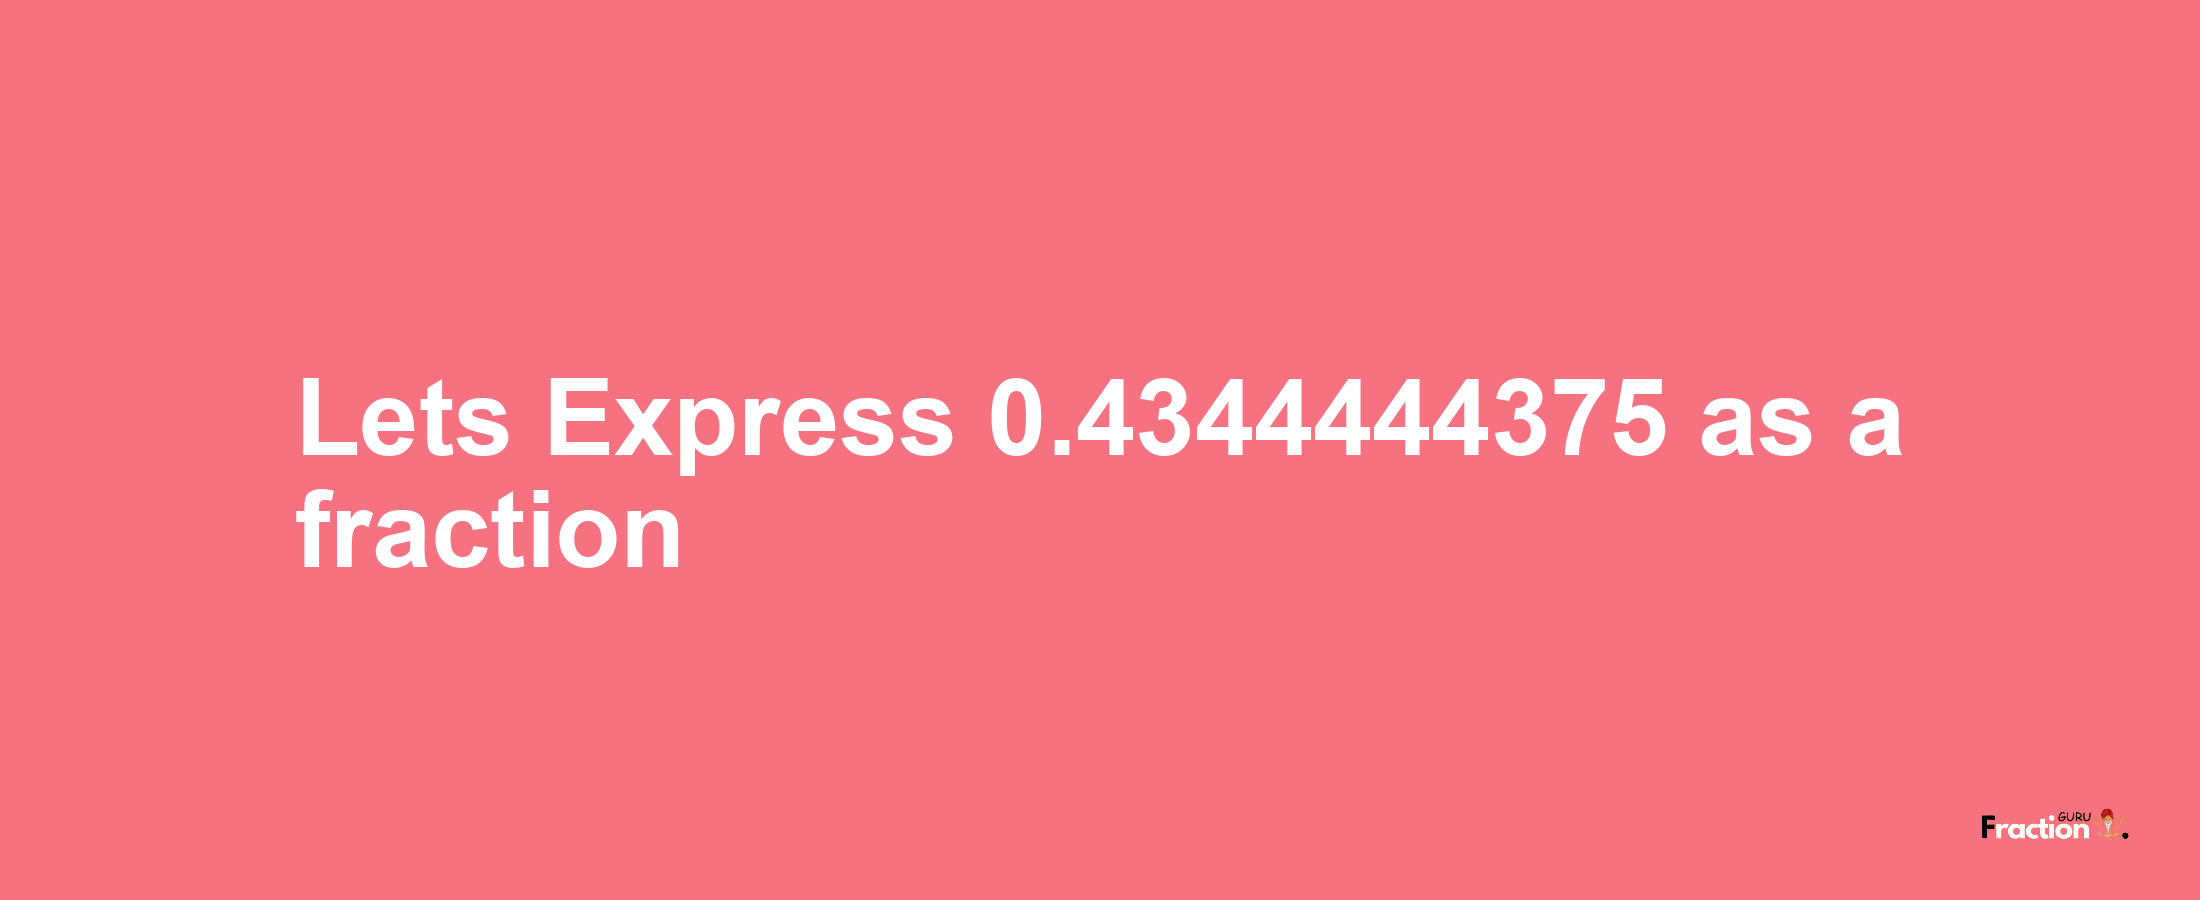 Lets Express 0.4344444375 as afraction